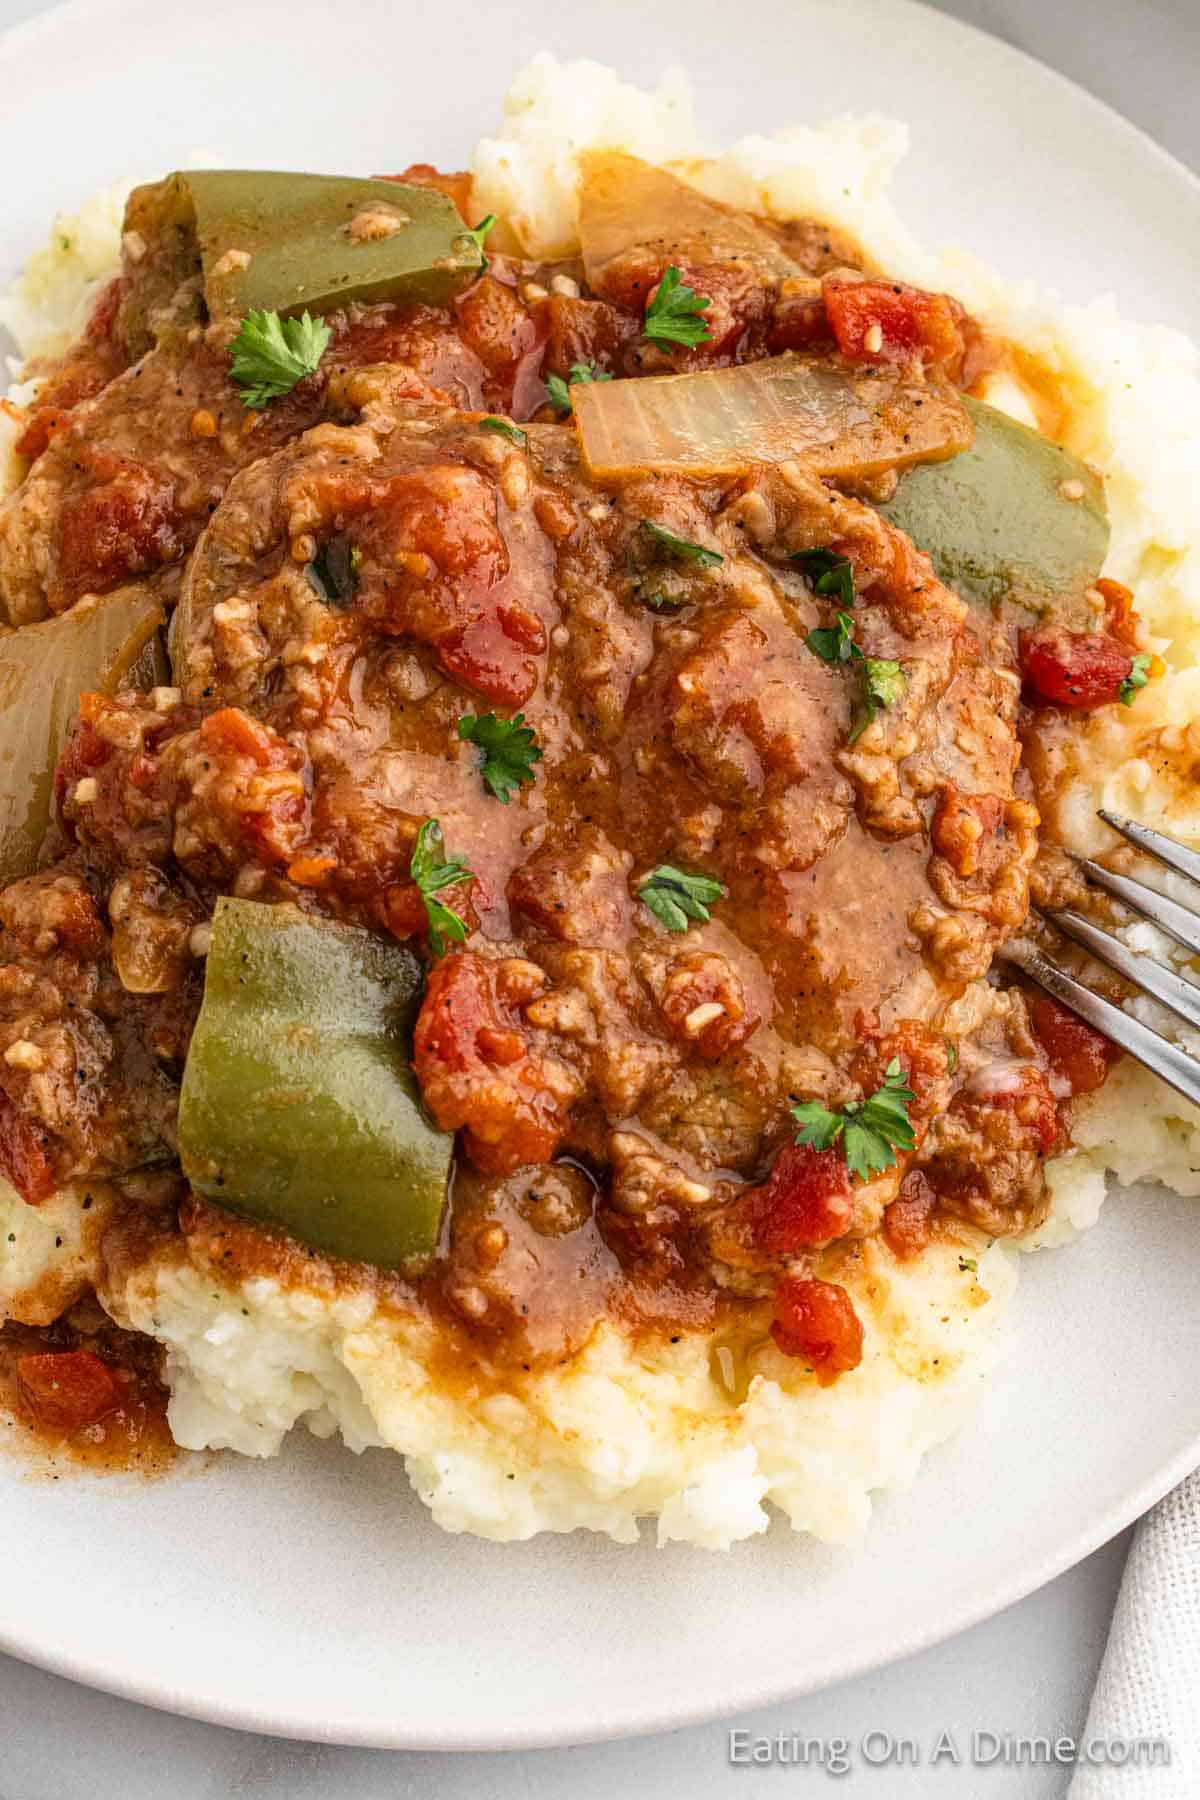 A serving of swiss steak and tomato sauce on mashed potatoes 